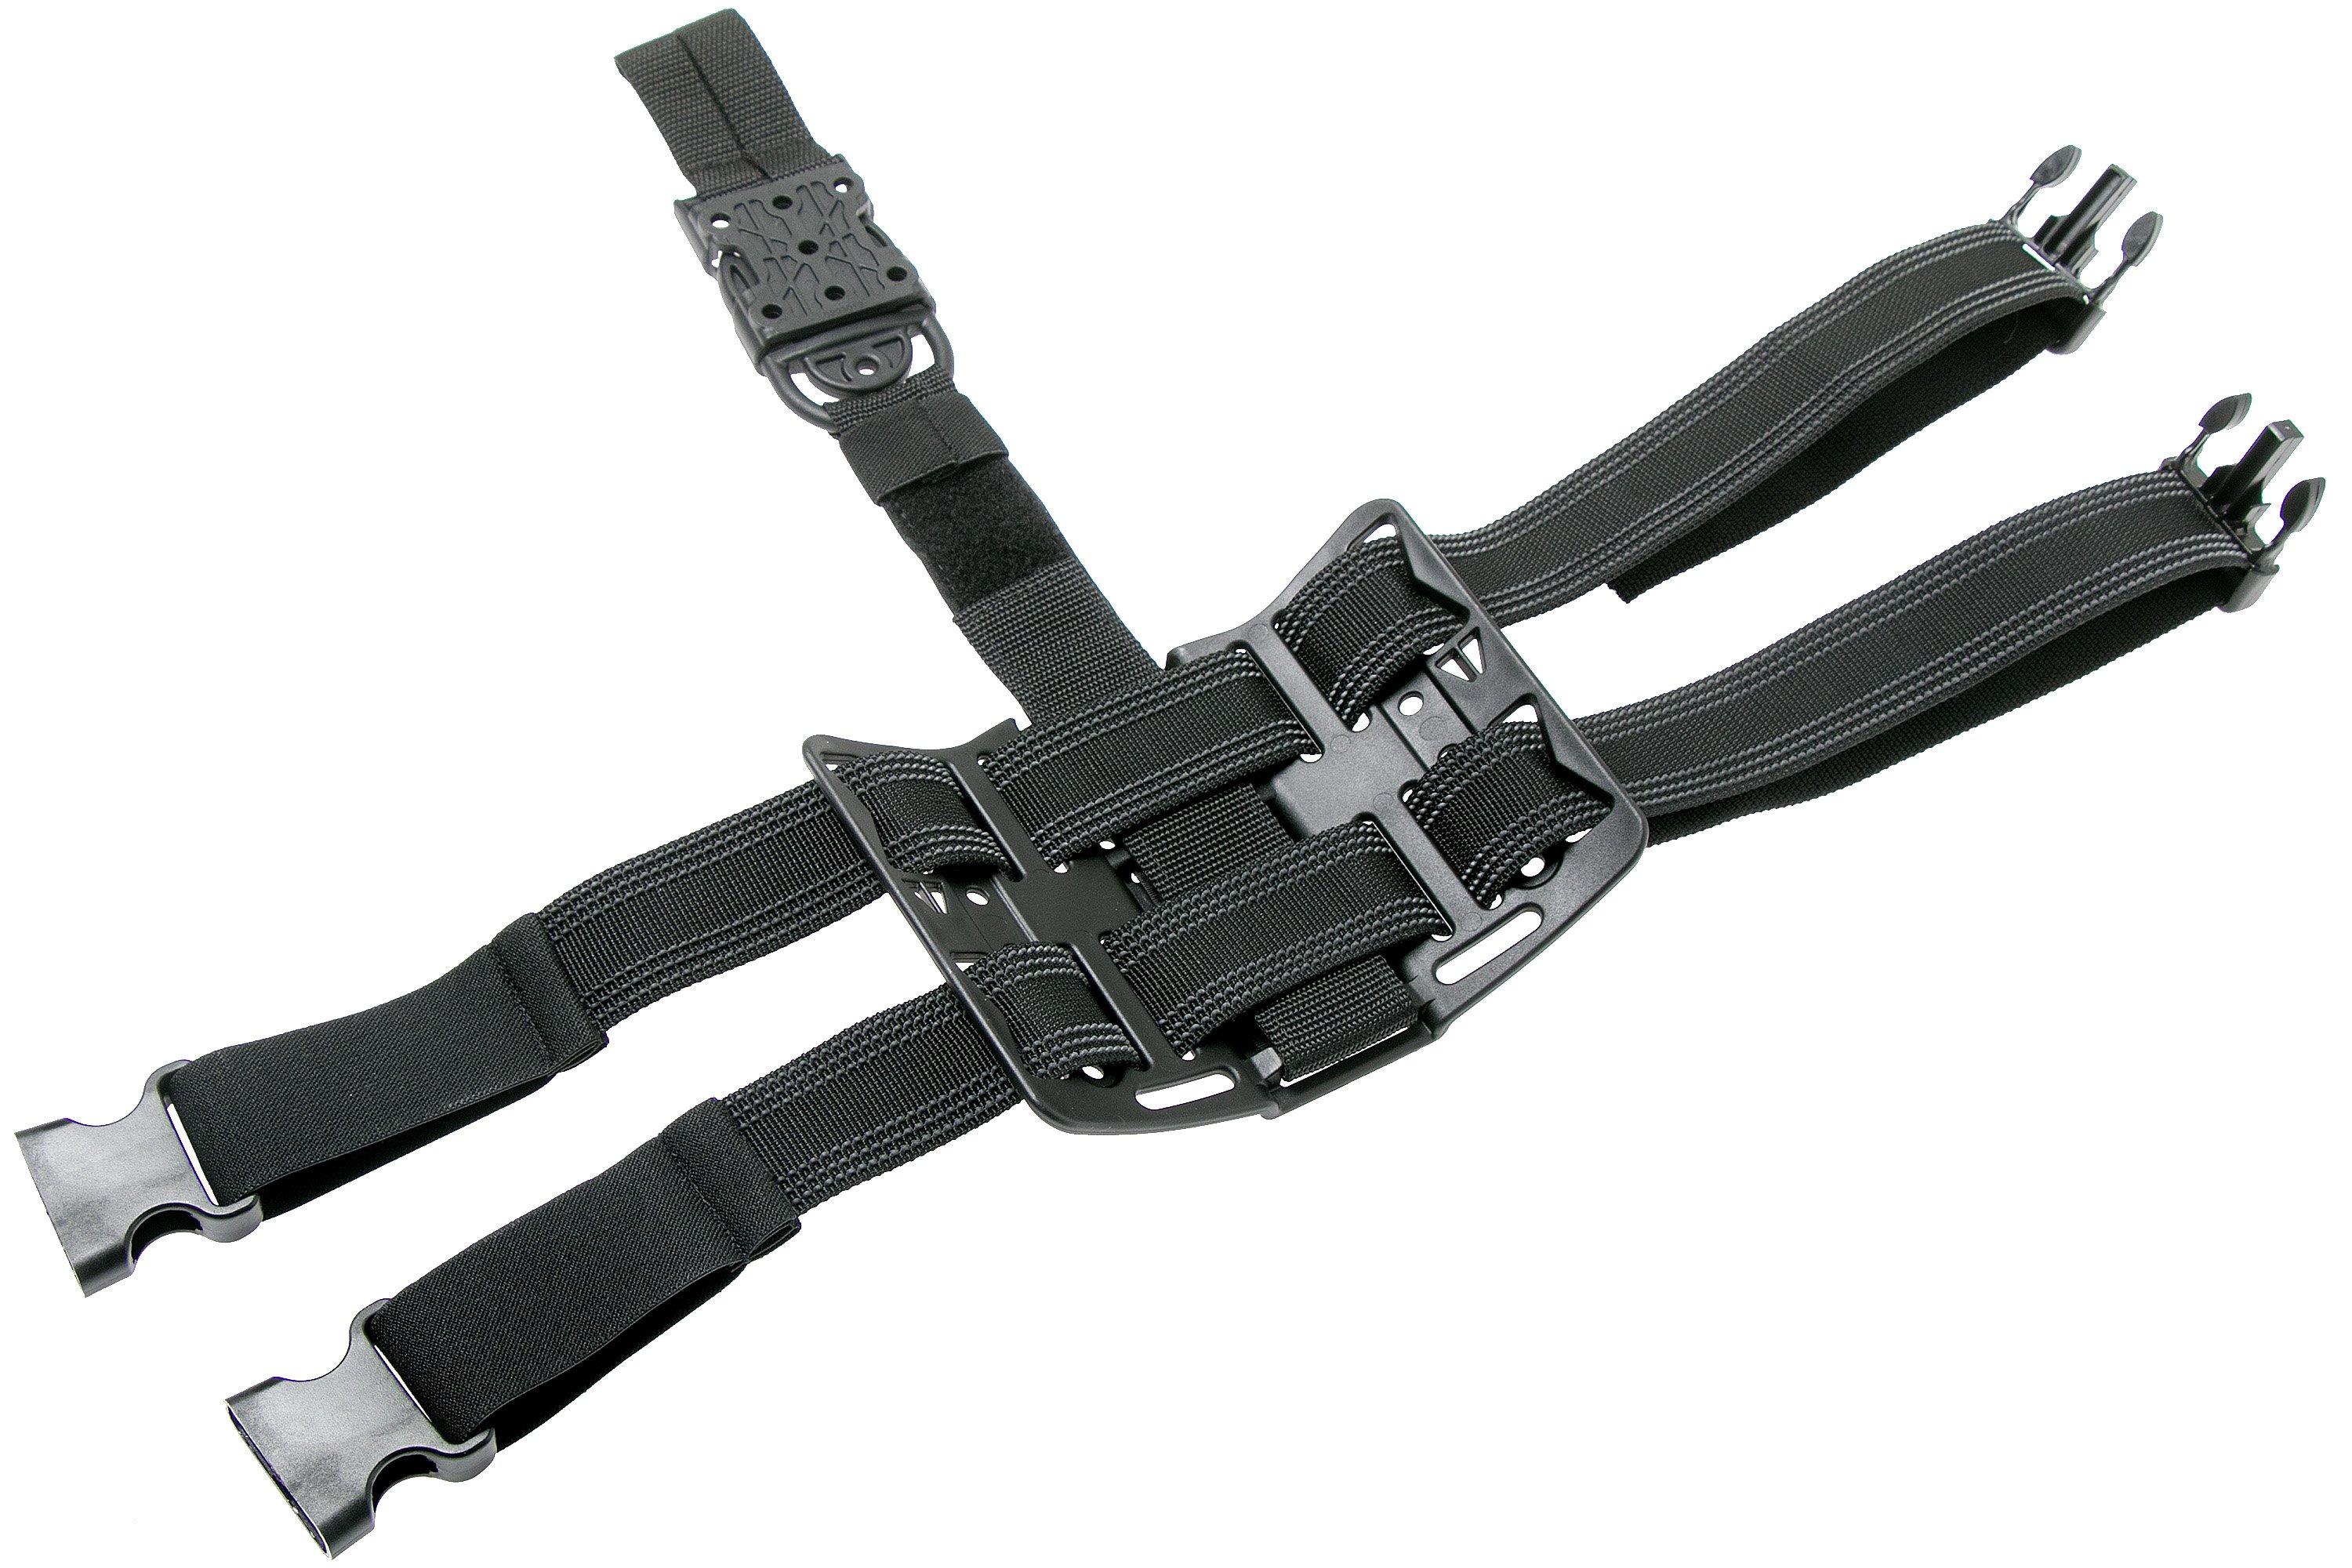 Blade-Tech Thigh Rig, leg attachment for sheaths and holsters